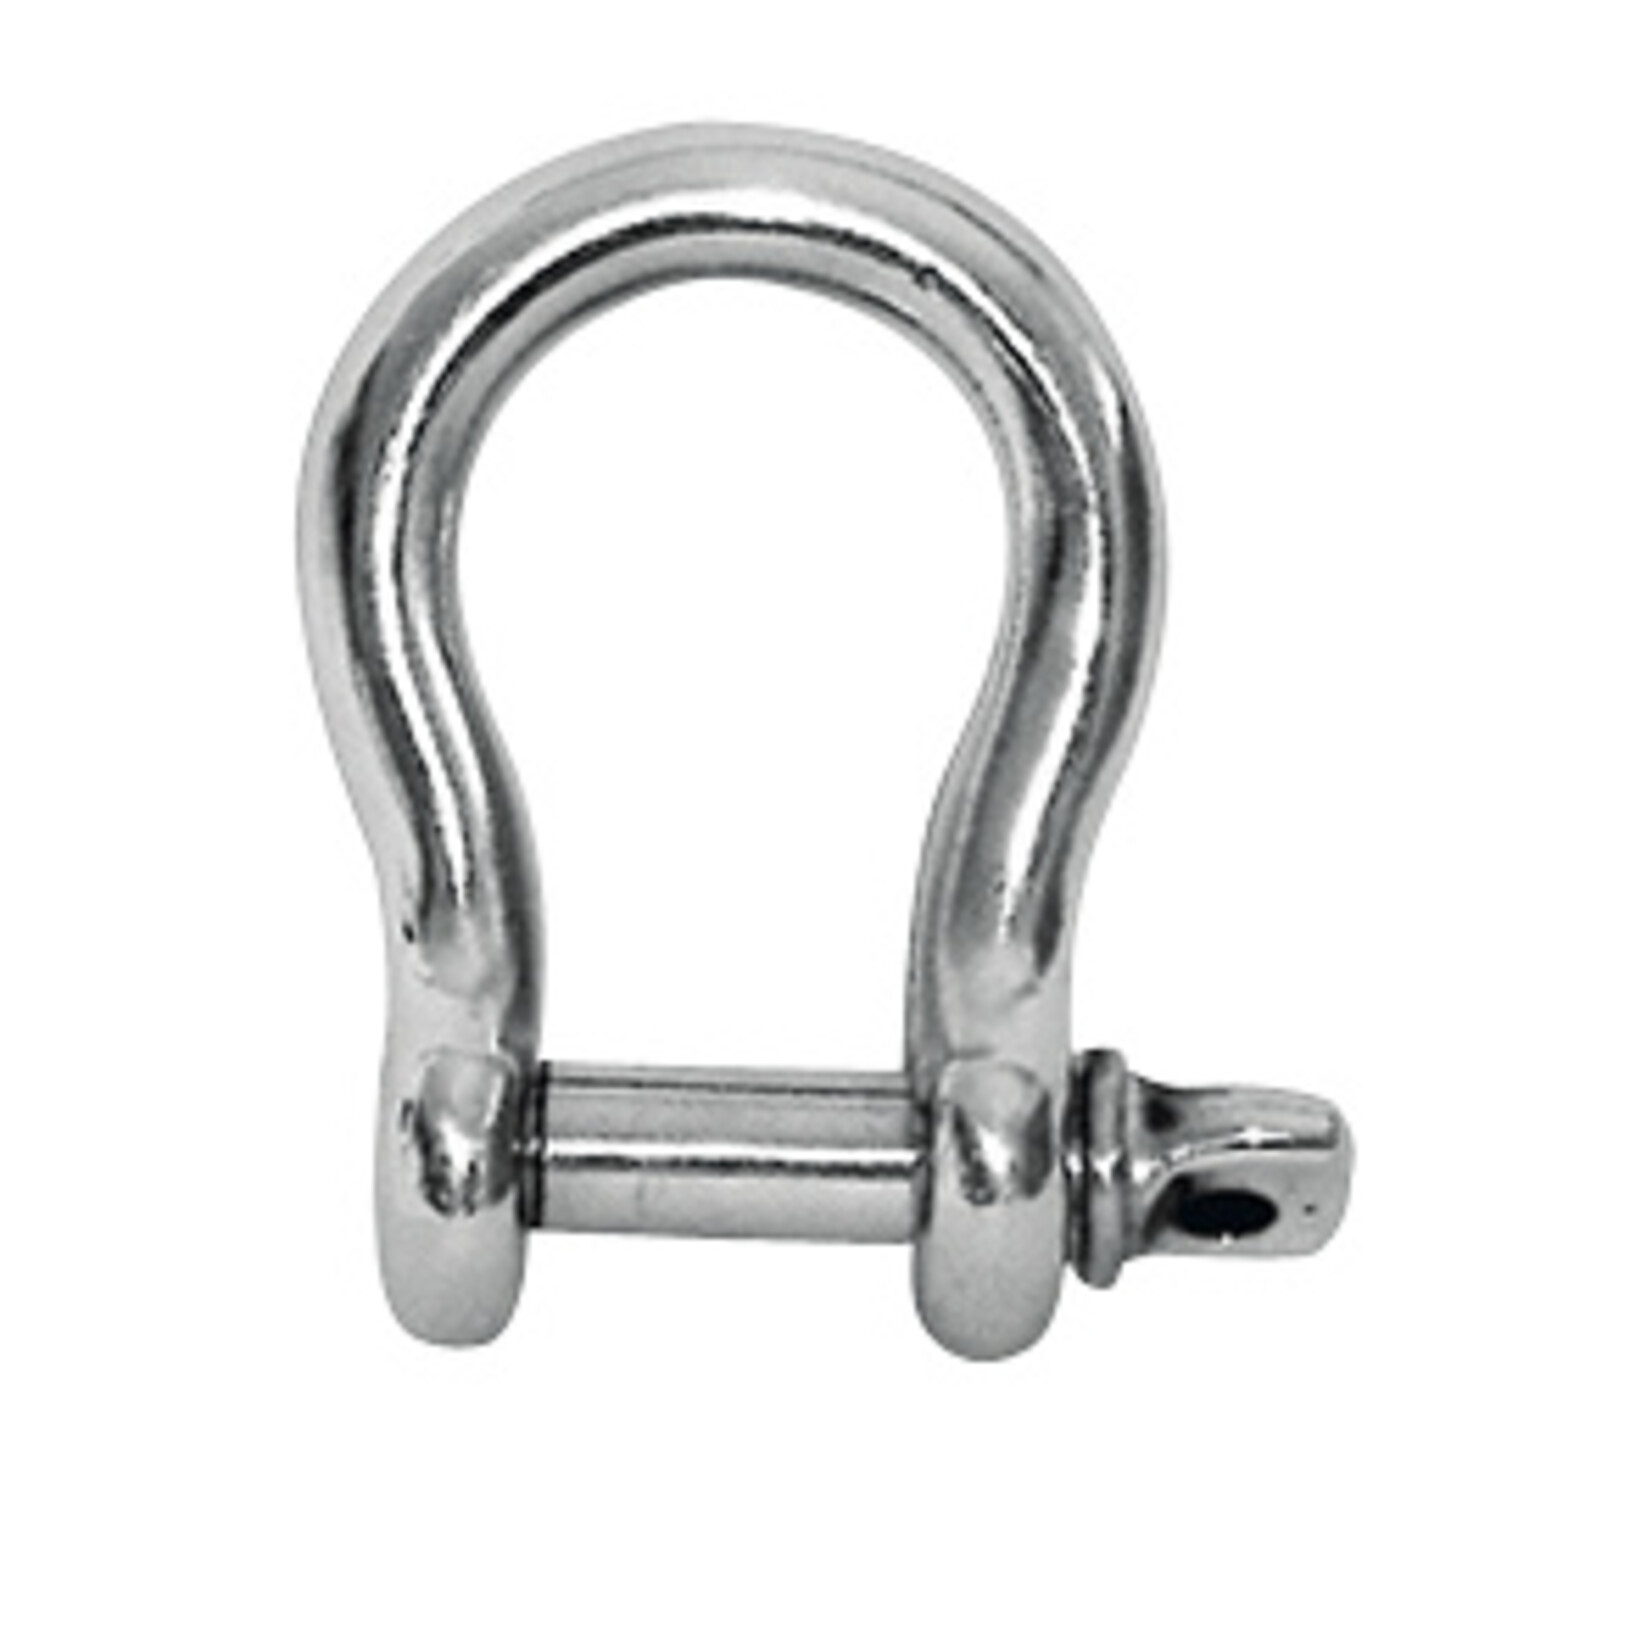 Plastimo St.s bow shackle d.8mm